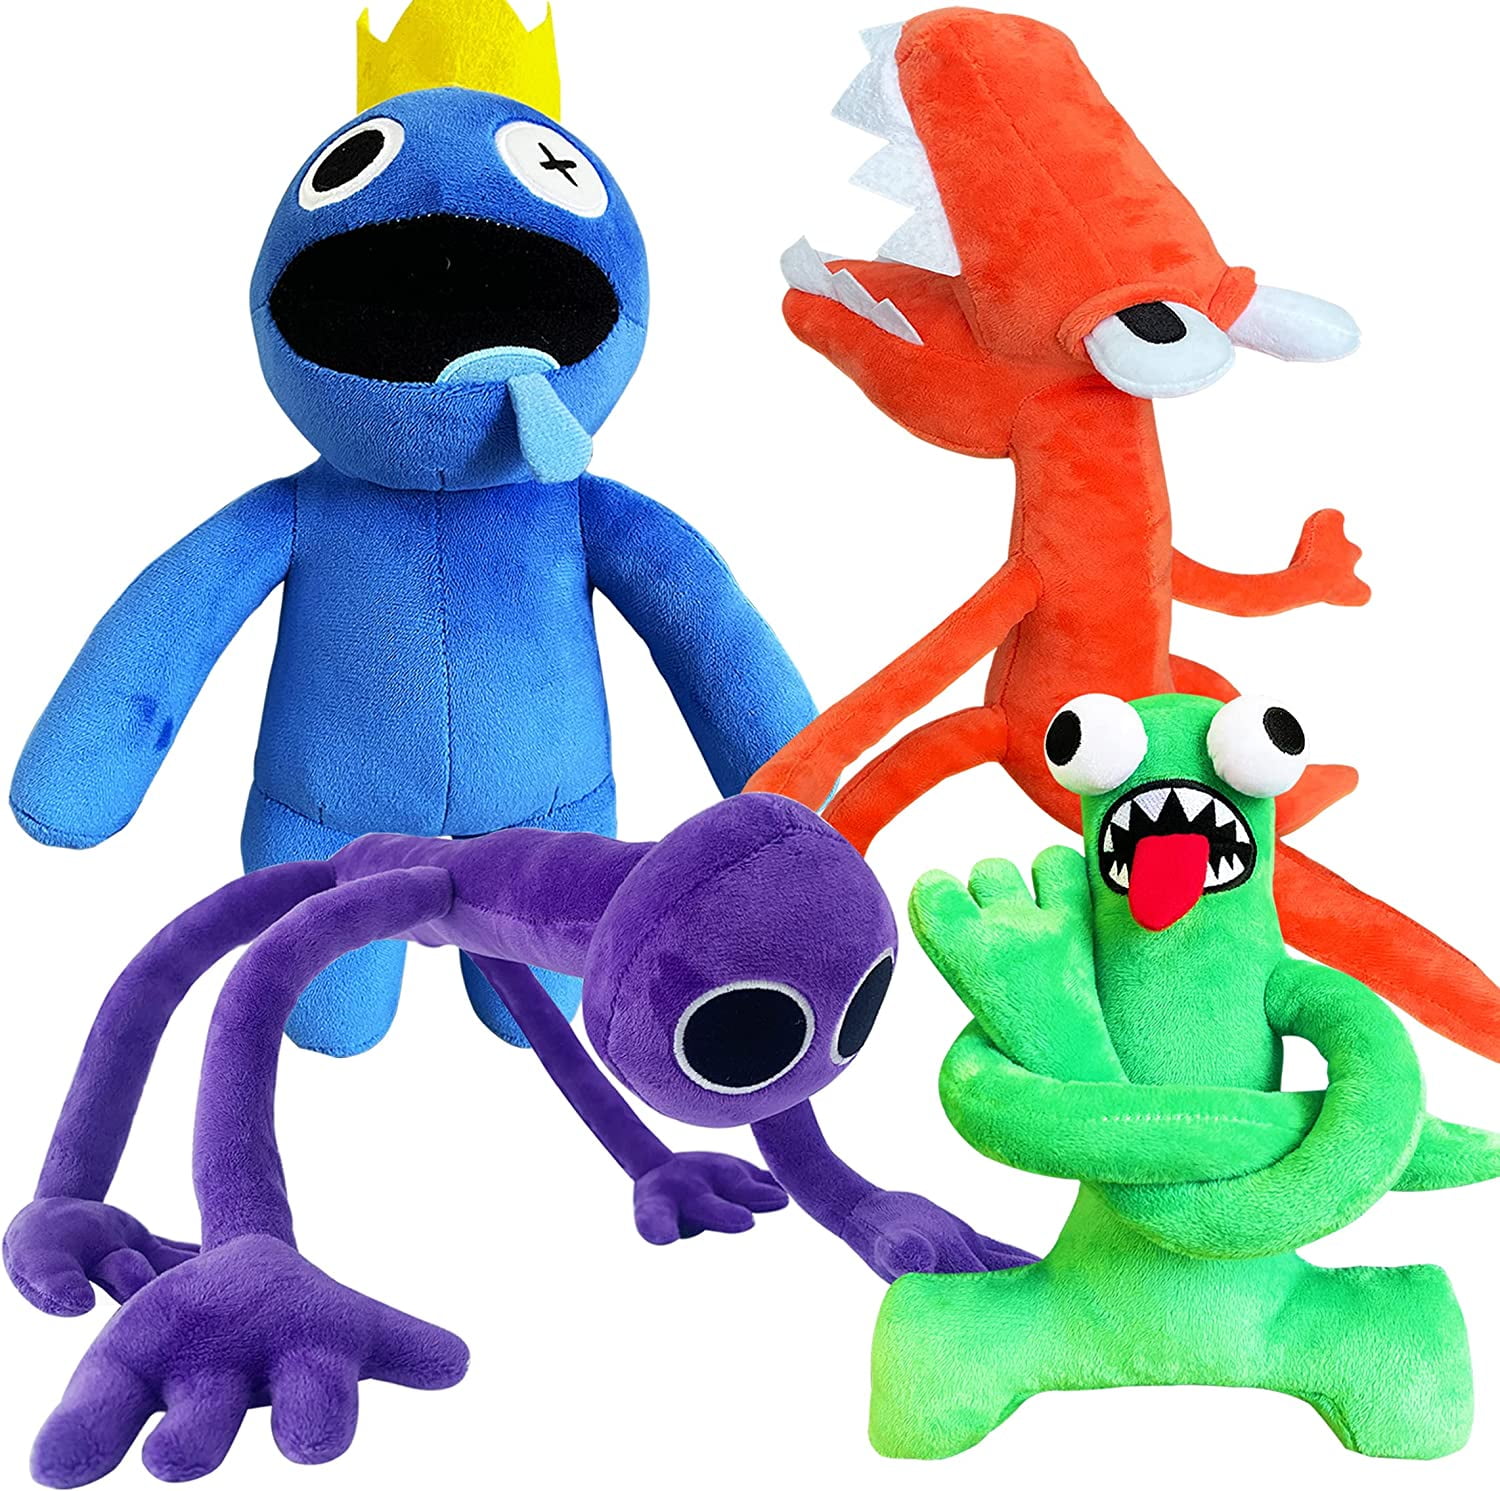 Plush toy monster yellow from rainbow friends 3D model